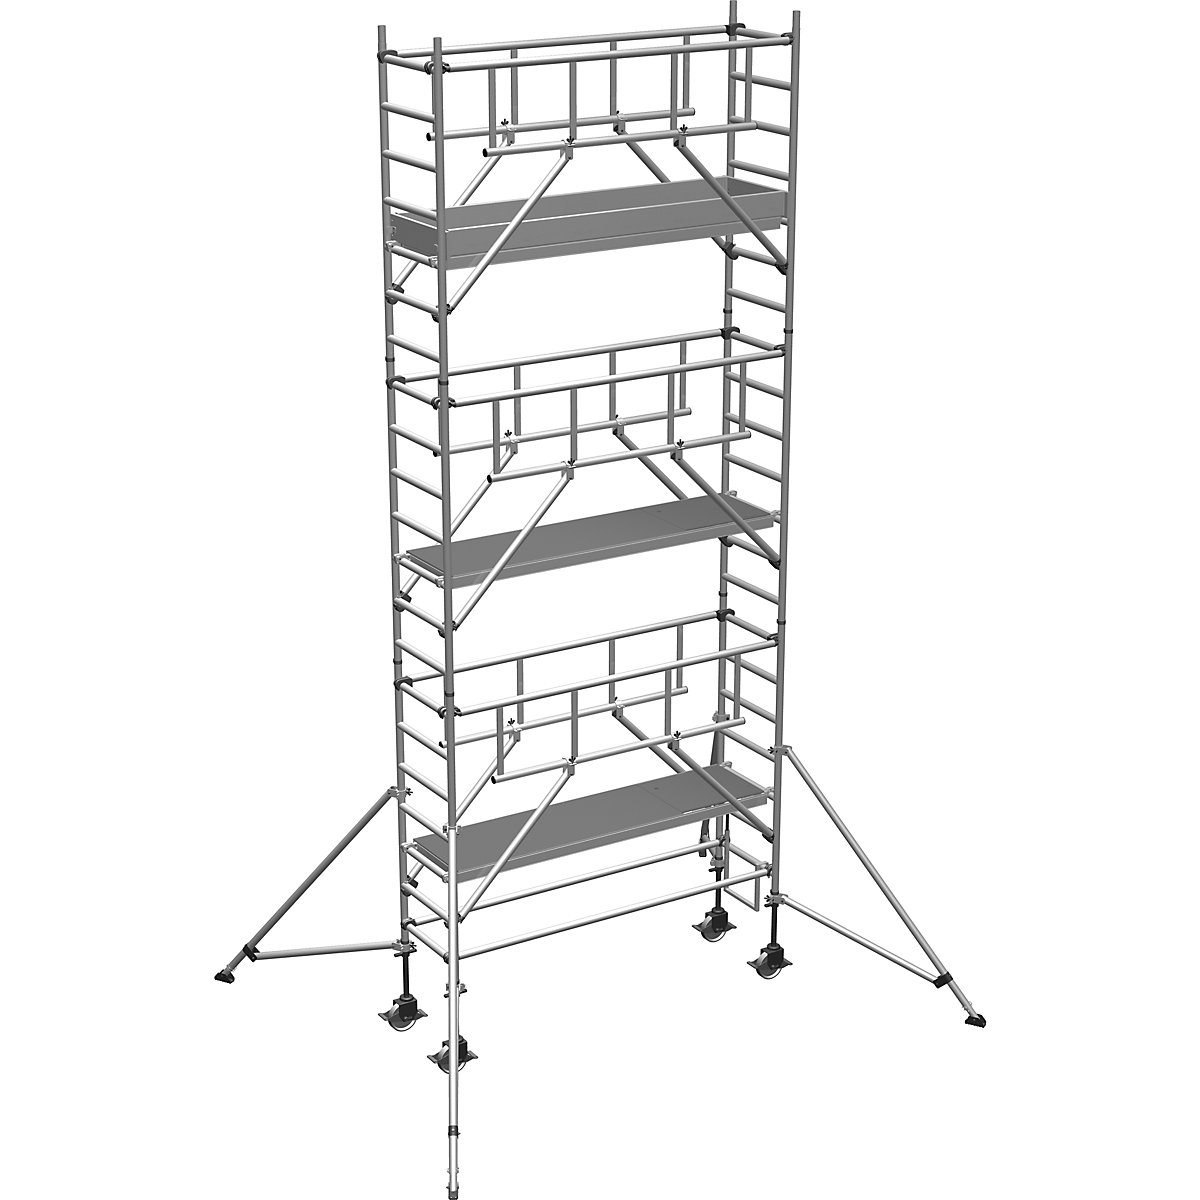 S-PLUS mobile access tower – ZARGES, platform 1.80 x 0.60 m, working height 7.30 m